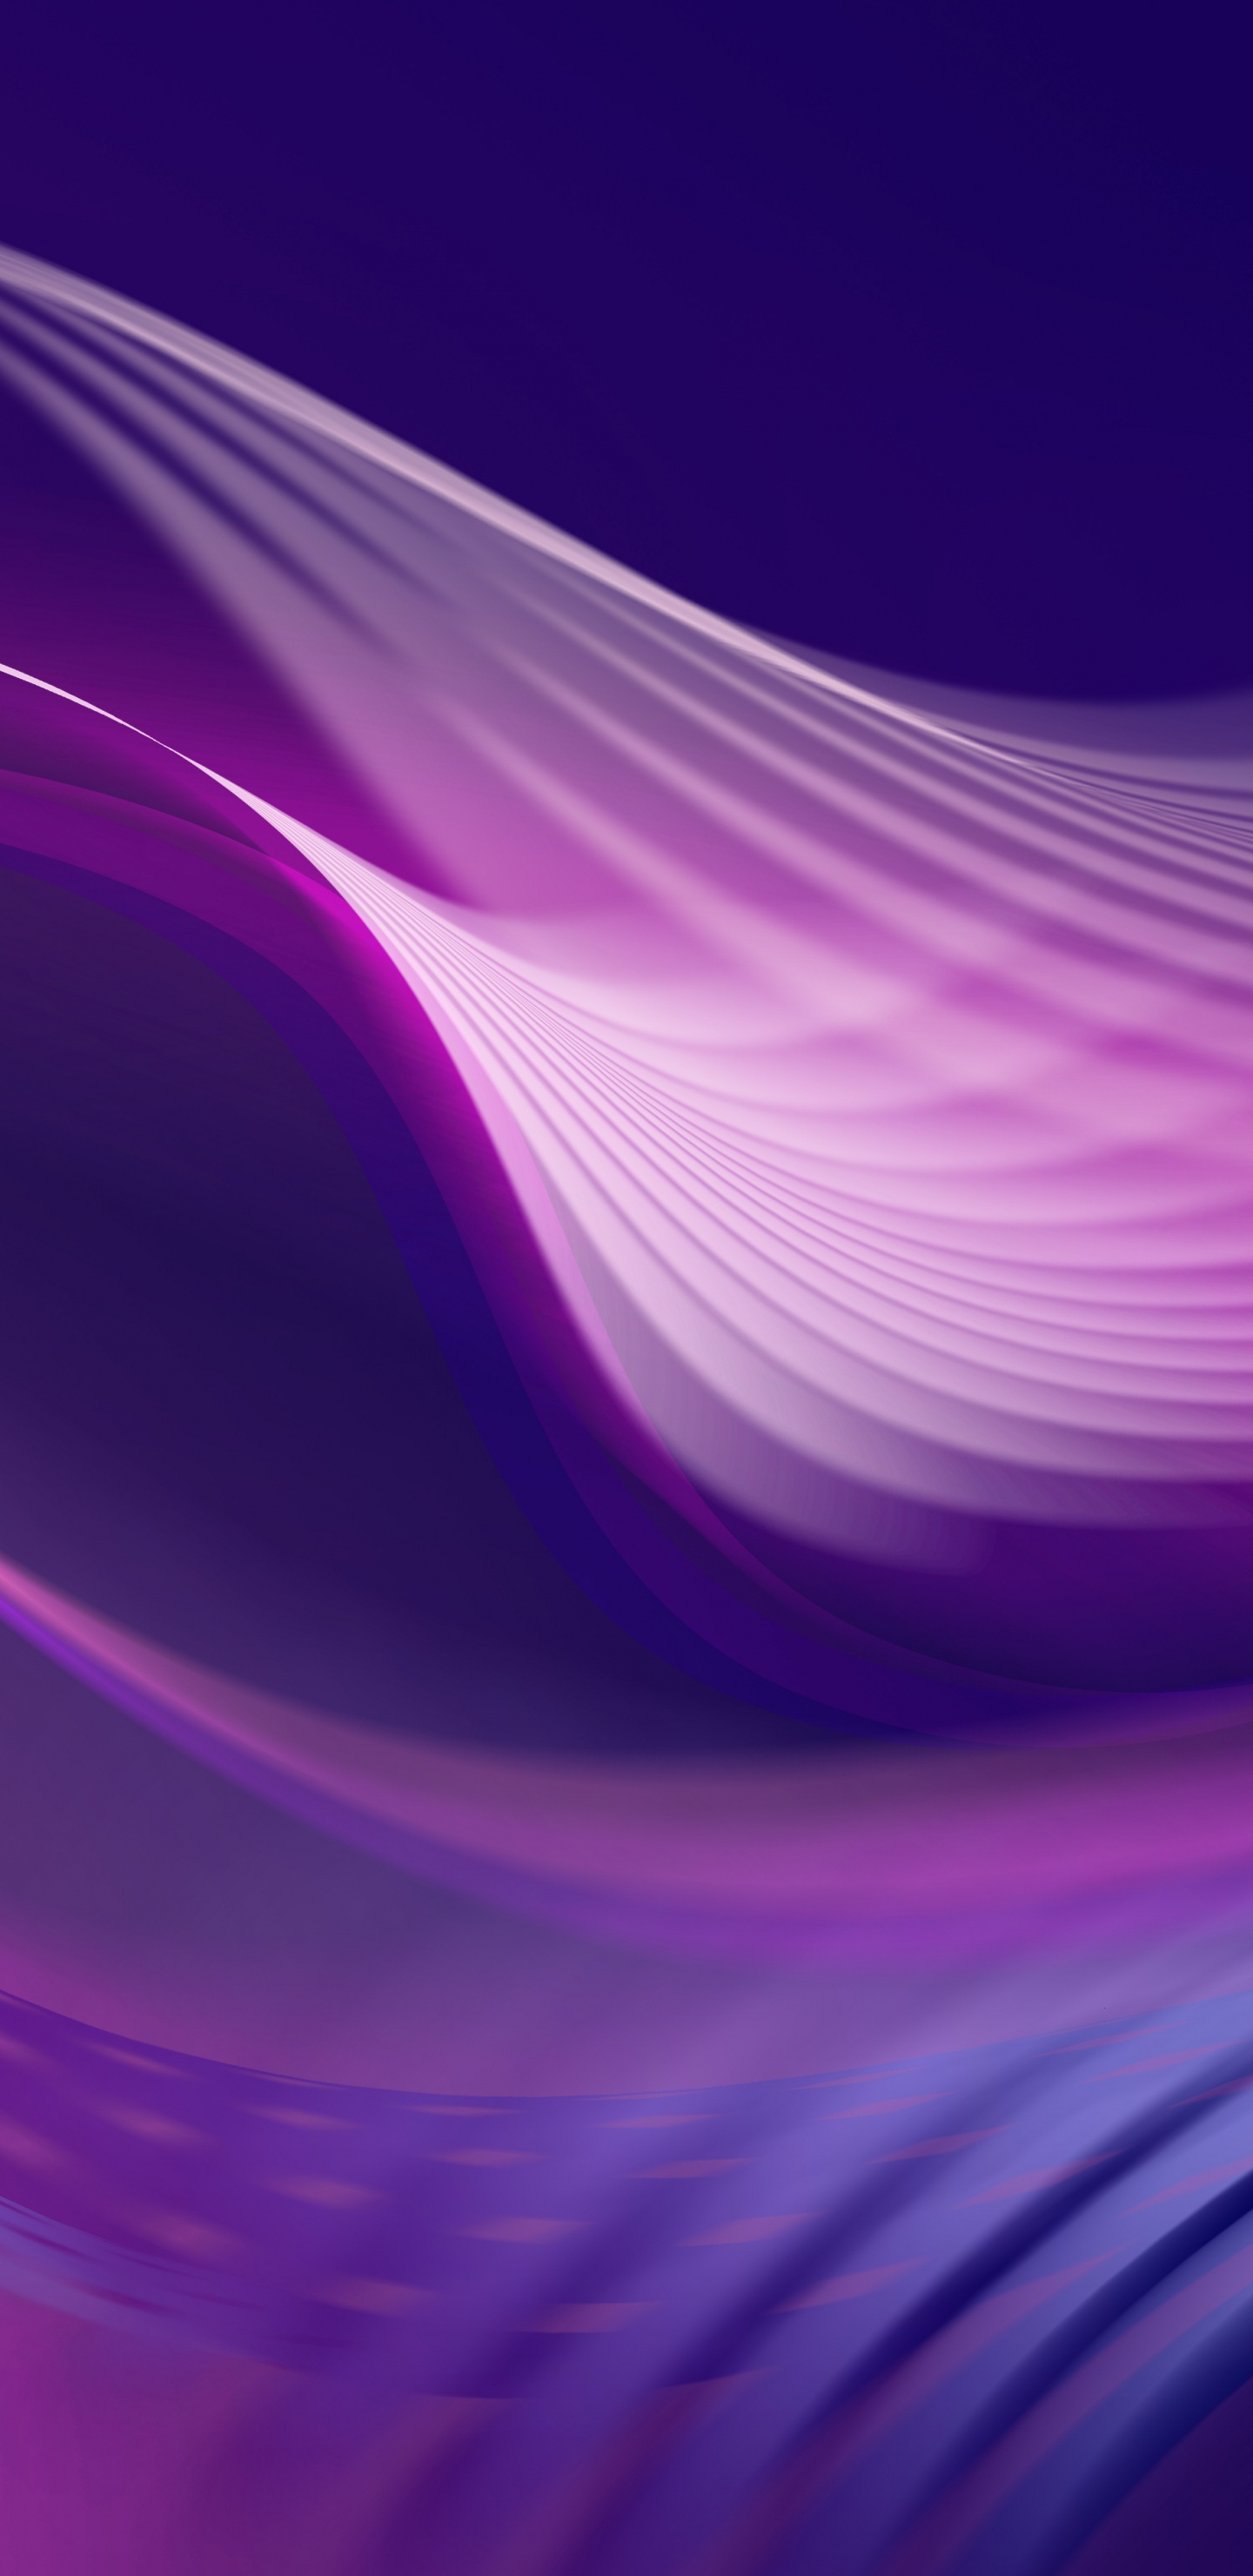 Purple and White Light Illustration. Wallpaper in 1440x2960 Resolution